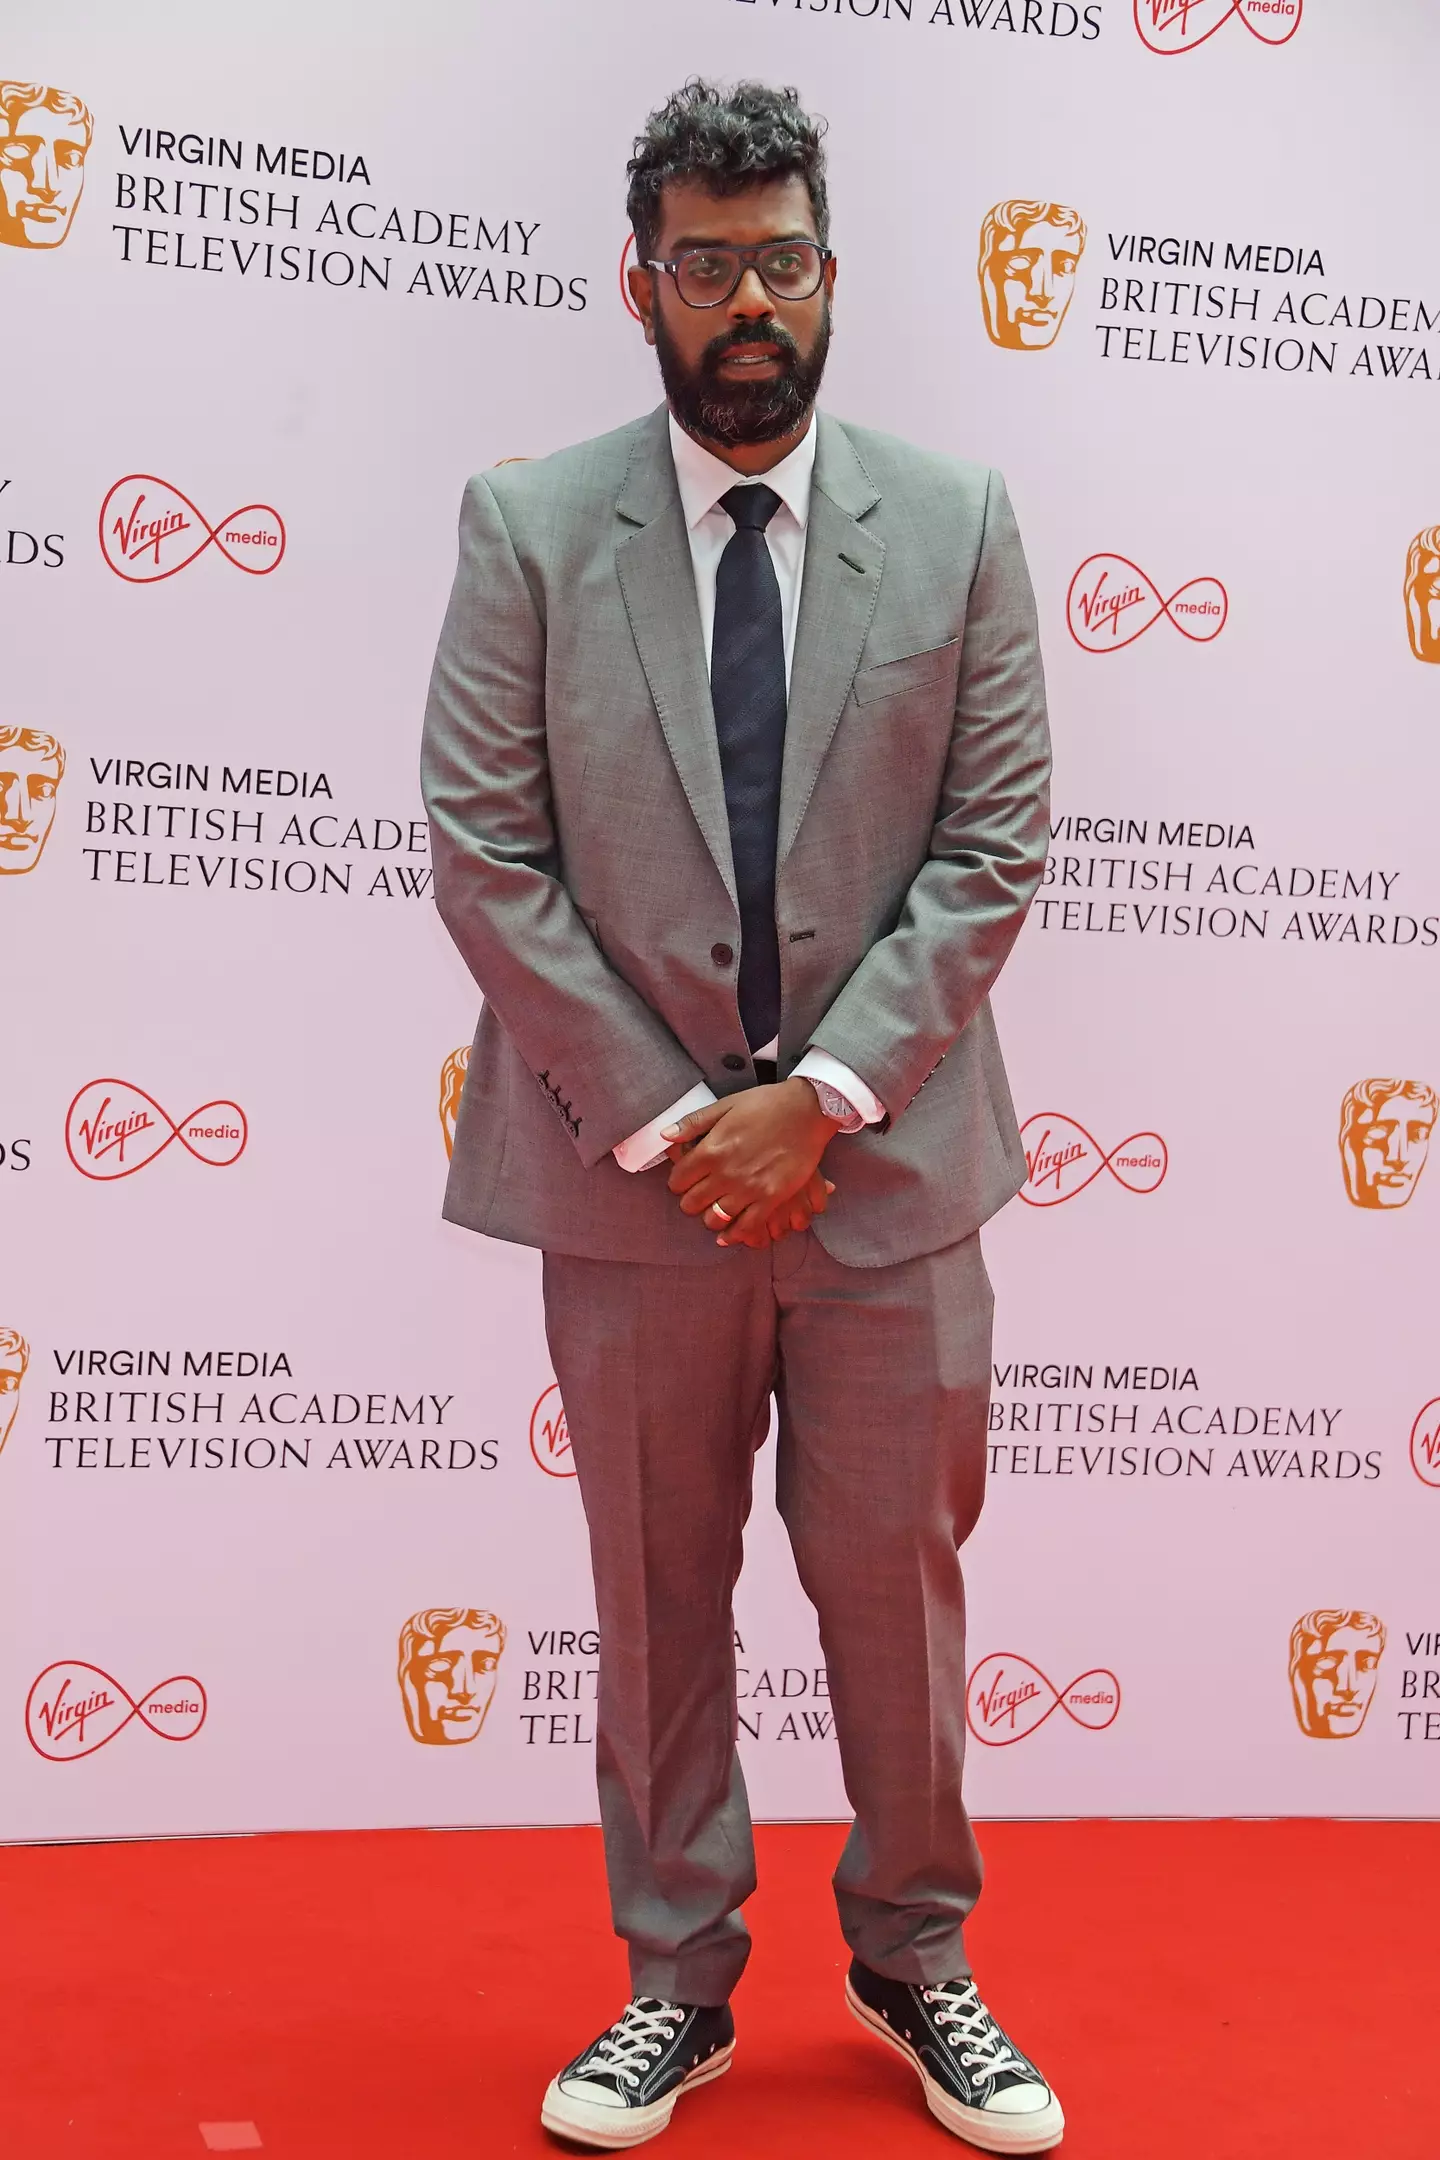 Romesh Ranganathan will be co-commentating with Tom Davis.